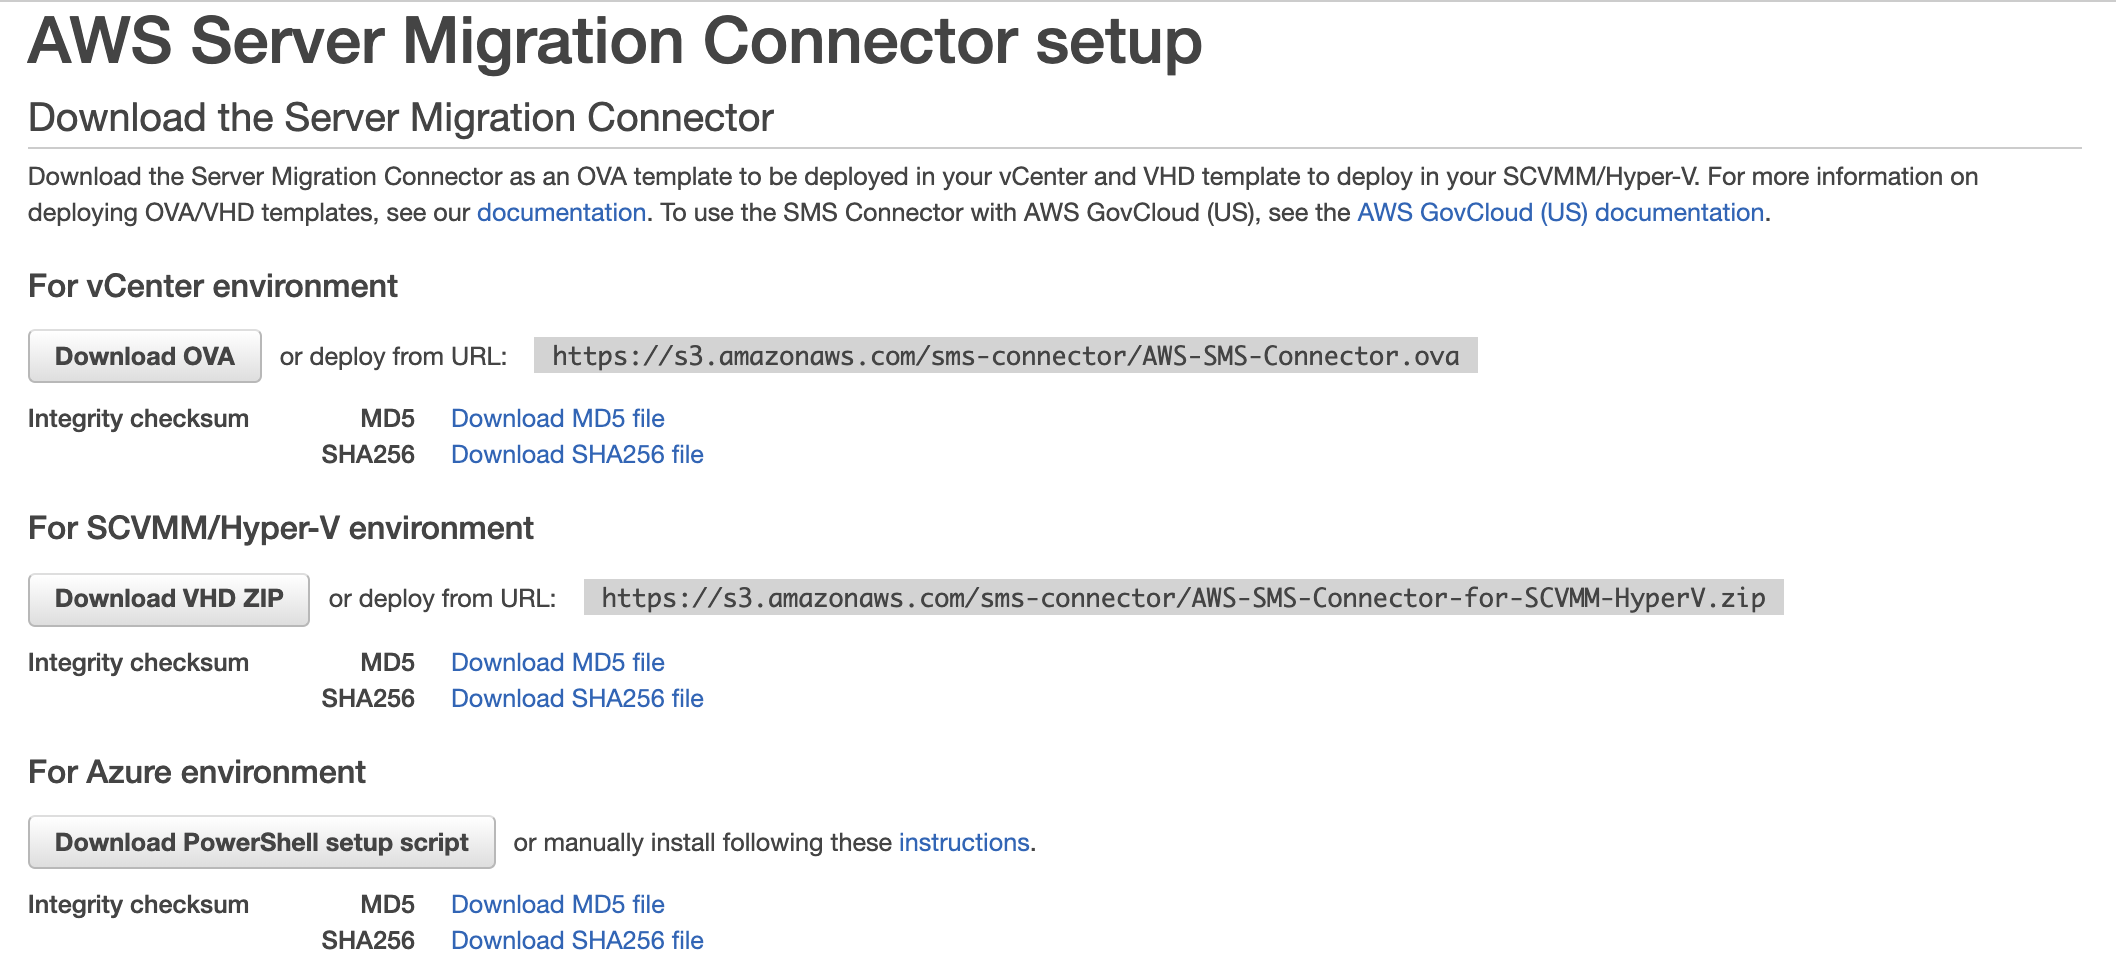 AWS Server Migration Connector setup

Download the Server Migration Connector

Download the Server Migration Connector as an OVA template to be deployed in your vCenter and VHD template to deploy in your SCVMM/Hyper-V. For more information on
deploying OVA/VHD templates, see our documentation. To use the SMS Connector with AWS GovCloud (US), see the AWS GovCloud (US) documentation.

For vCenter environment

Download OVA | ordeploy from URL: https://s3.amazonaws .com/sms-connector/AWS-SMS-Connector.ova

Integrity checksum MD5 Download MDS file
SHA256 Download SHA256 file

For SCVMM/hHyper-V environment

Download VHD ZIP — or deploy from URL: —https://s3.amazonaws.com/sms-connector/AWS-SMS-Connector-for-SCVMM-HyperV. zip

Integrity checksum MD5 Download MDS file
SHA256 Download SHA256 file

For Azure environment

Download PowerShell setup script | or manually install following these instructions.

Integrity checksum MD5 Download MDS file
SHA256 Download SHA256 file